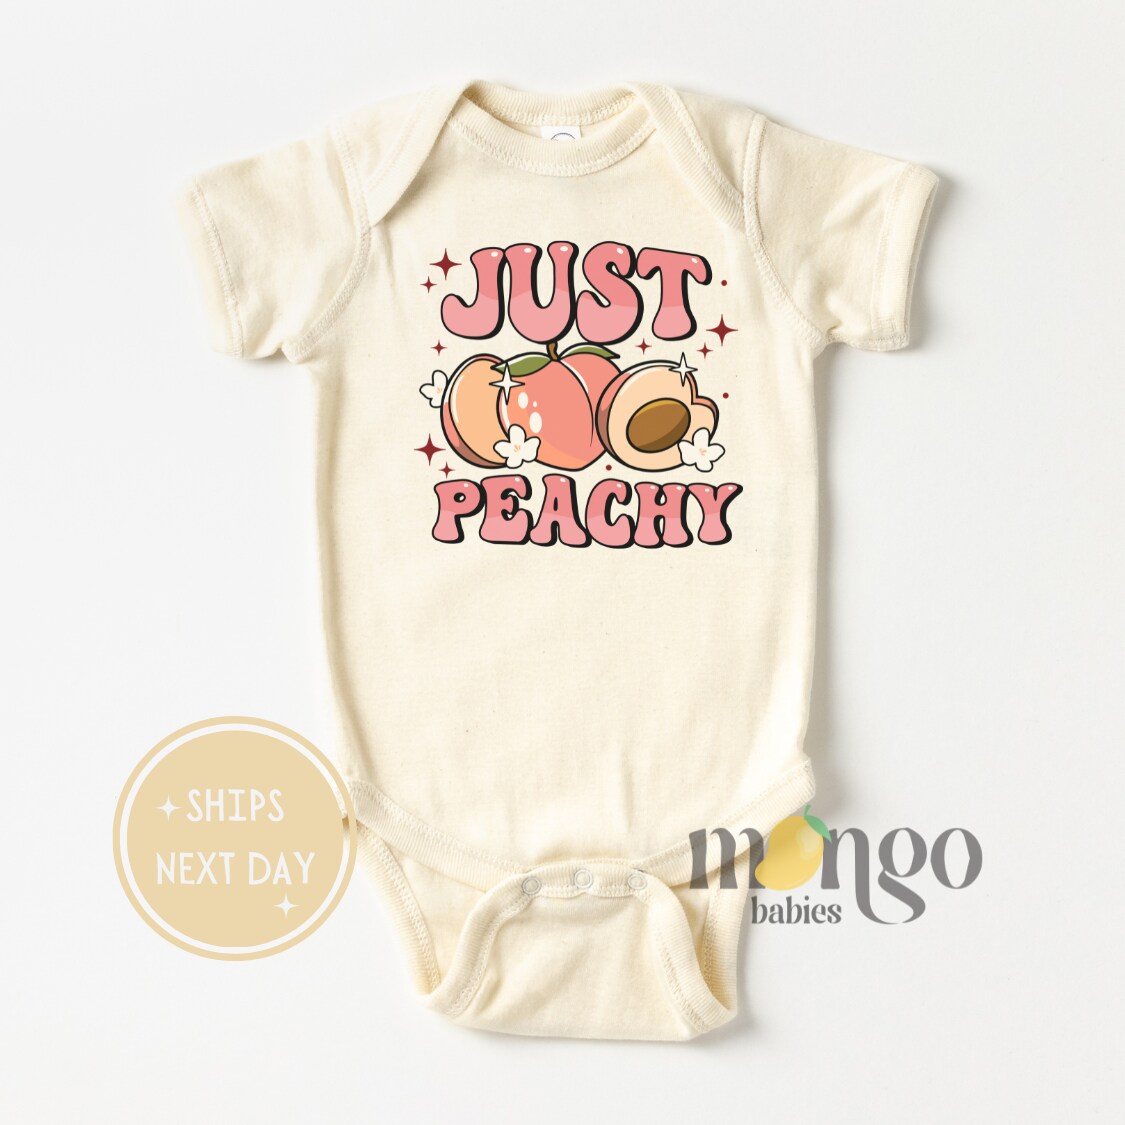 Just Peachy – Peach Fit Clothing